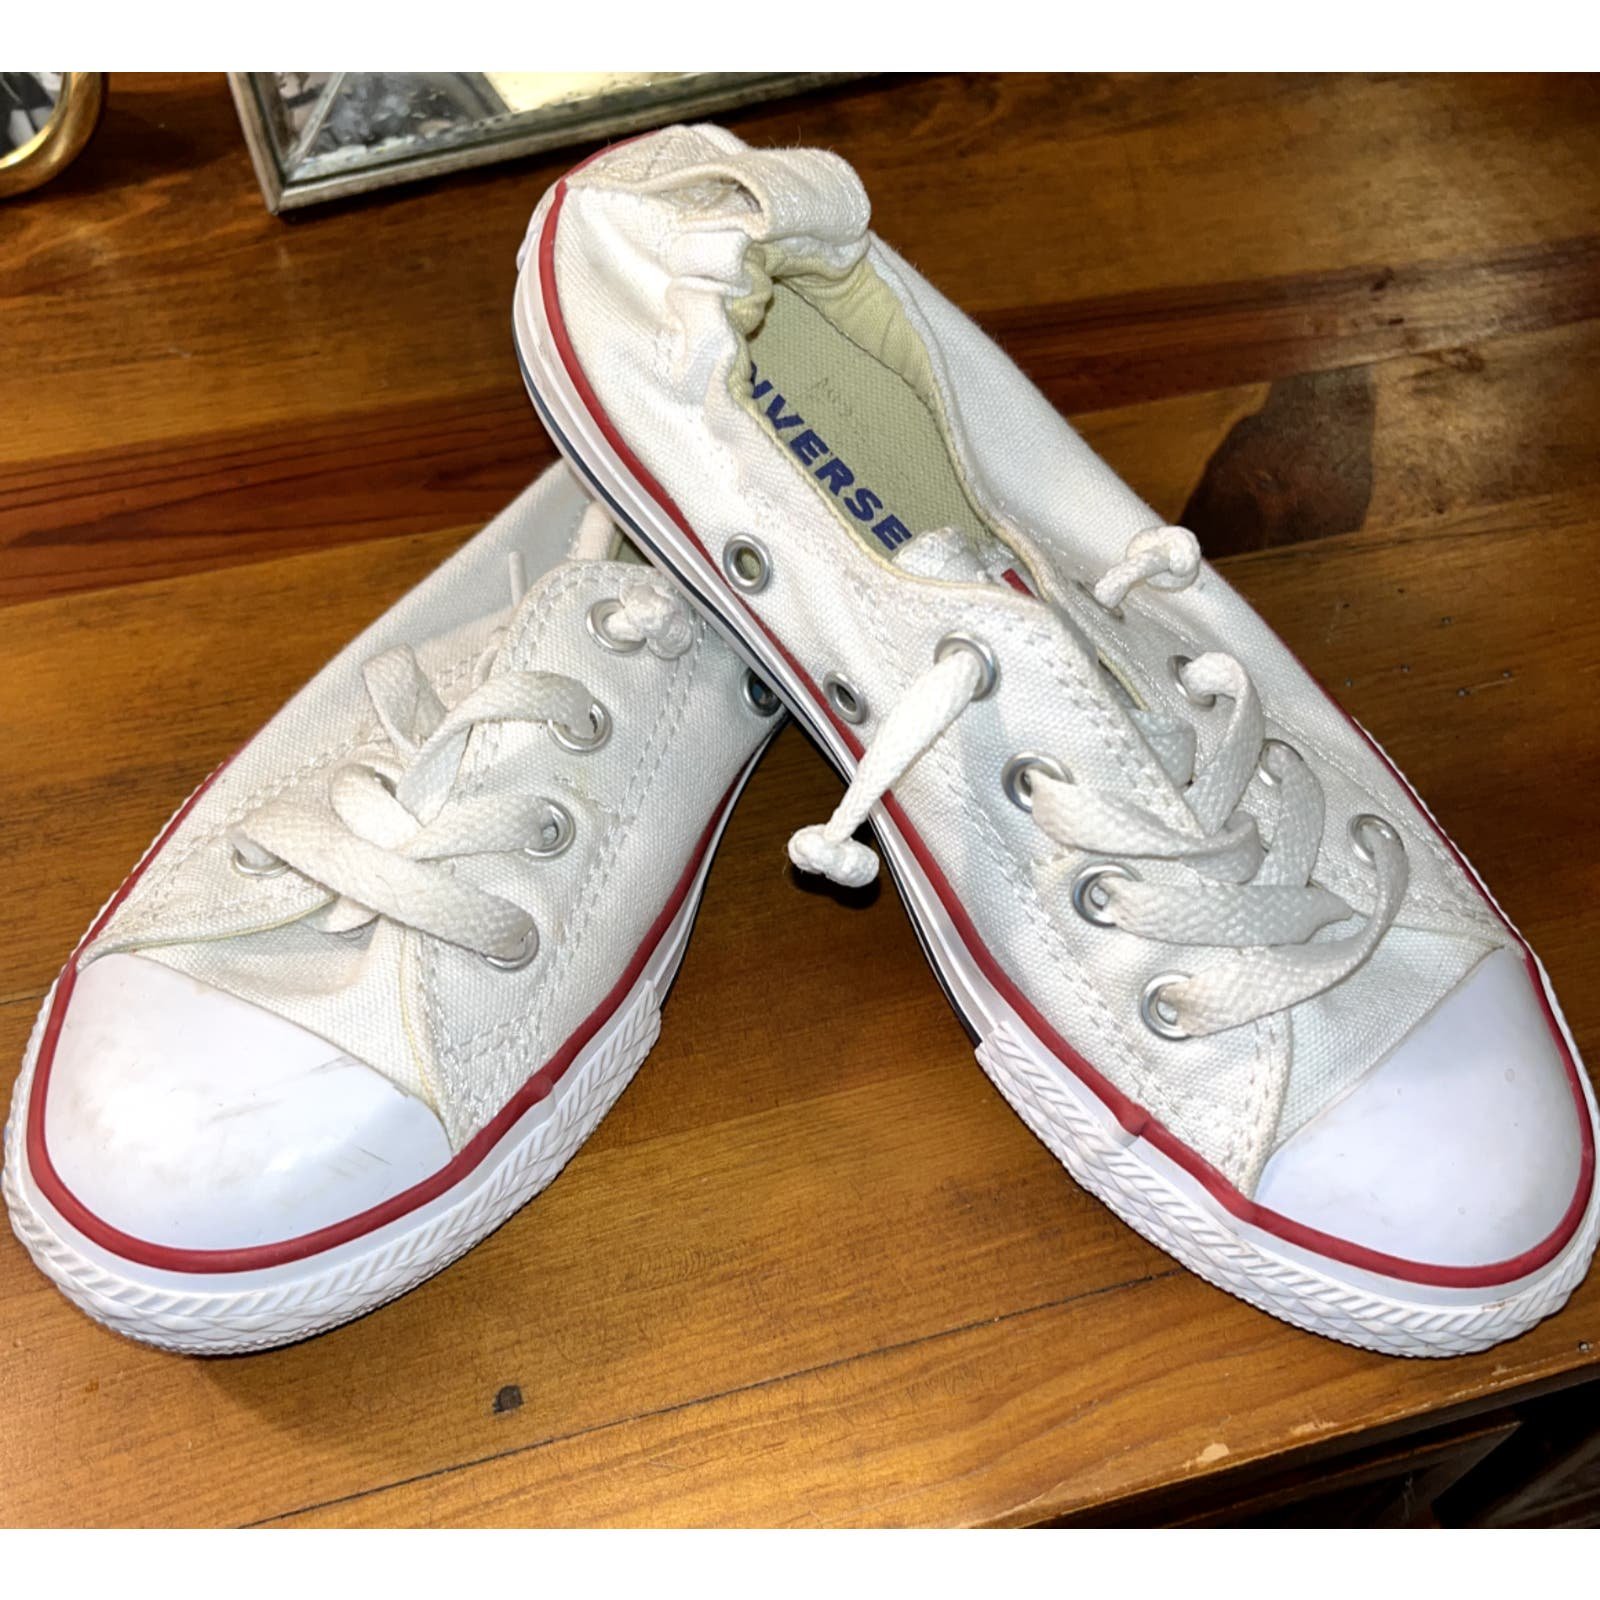 CONVERSE ALL STAR White Low Top Kids Youth Sneakers Size 1 Elastic Heel DSSrRhQBo